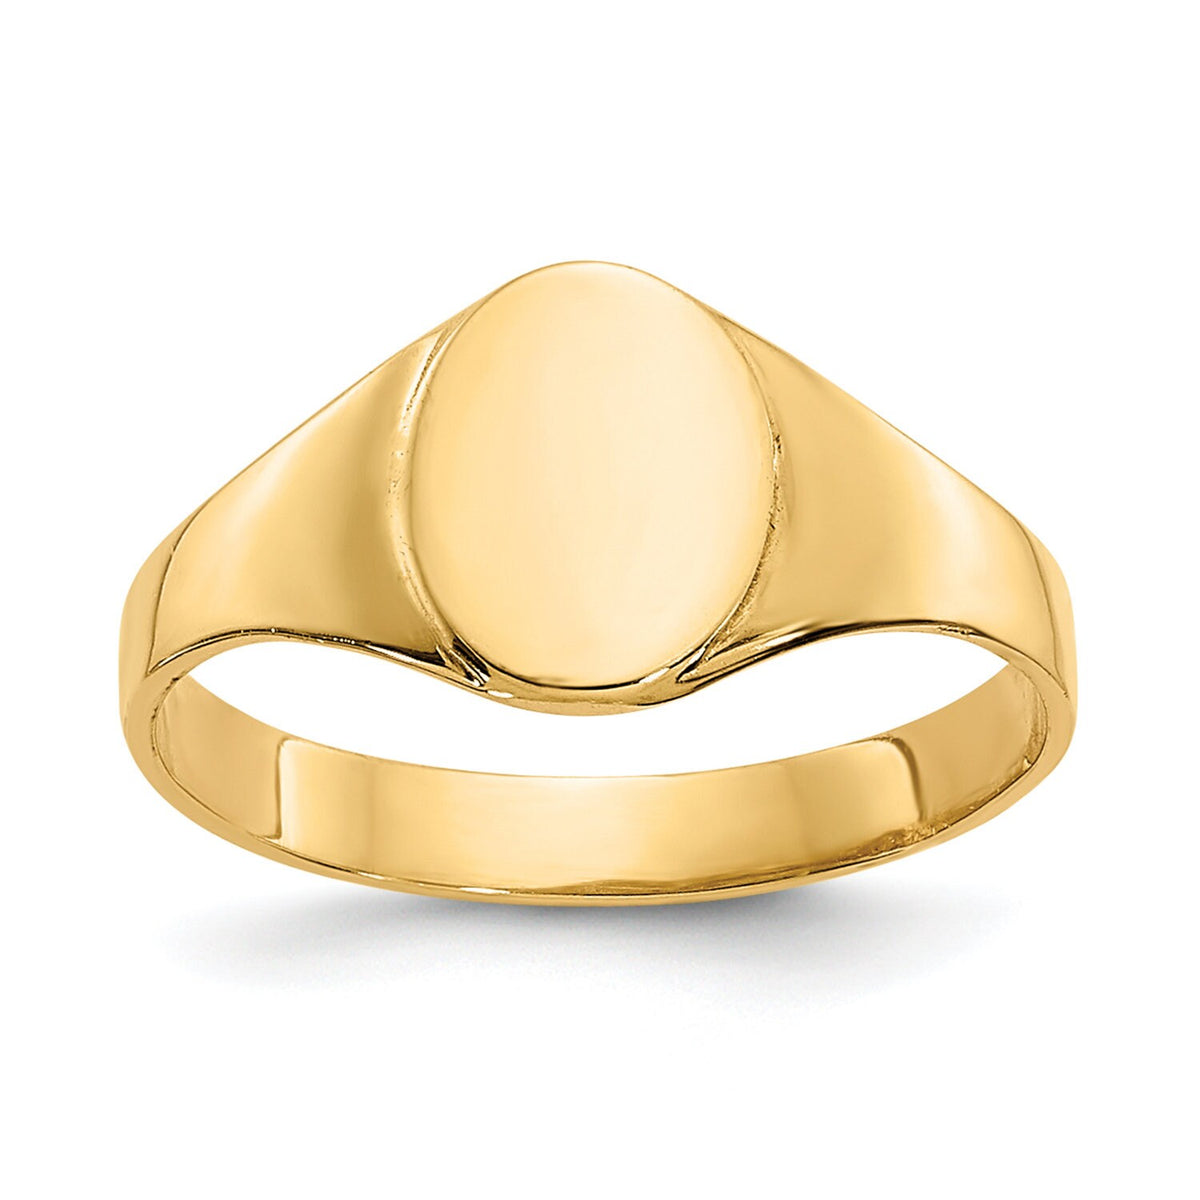 Children's 14k Yellow Gold Engravable Oval Baby Signet Ring ( 1 Character ) SIZE 1-3 Gift Box Included